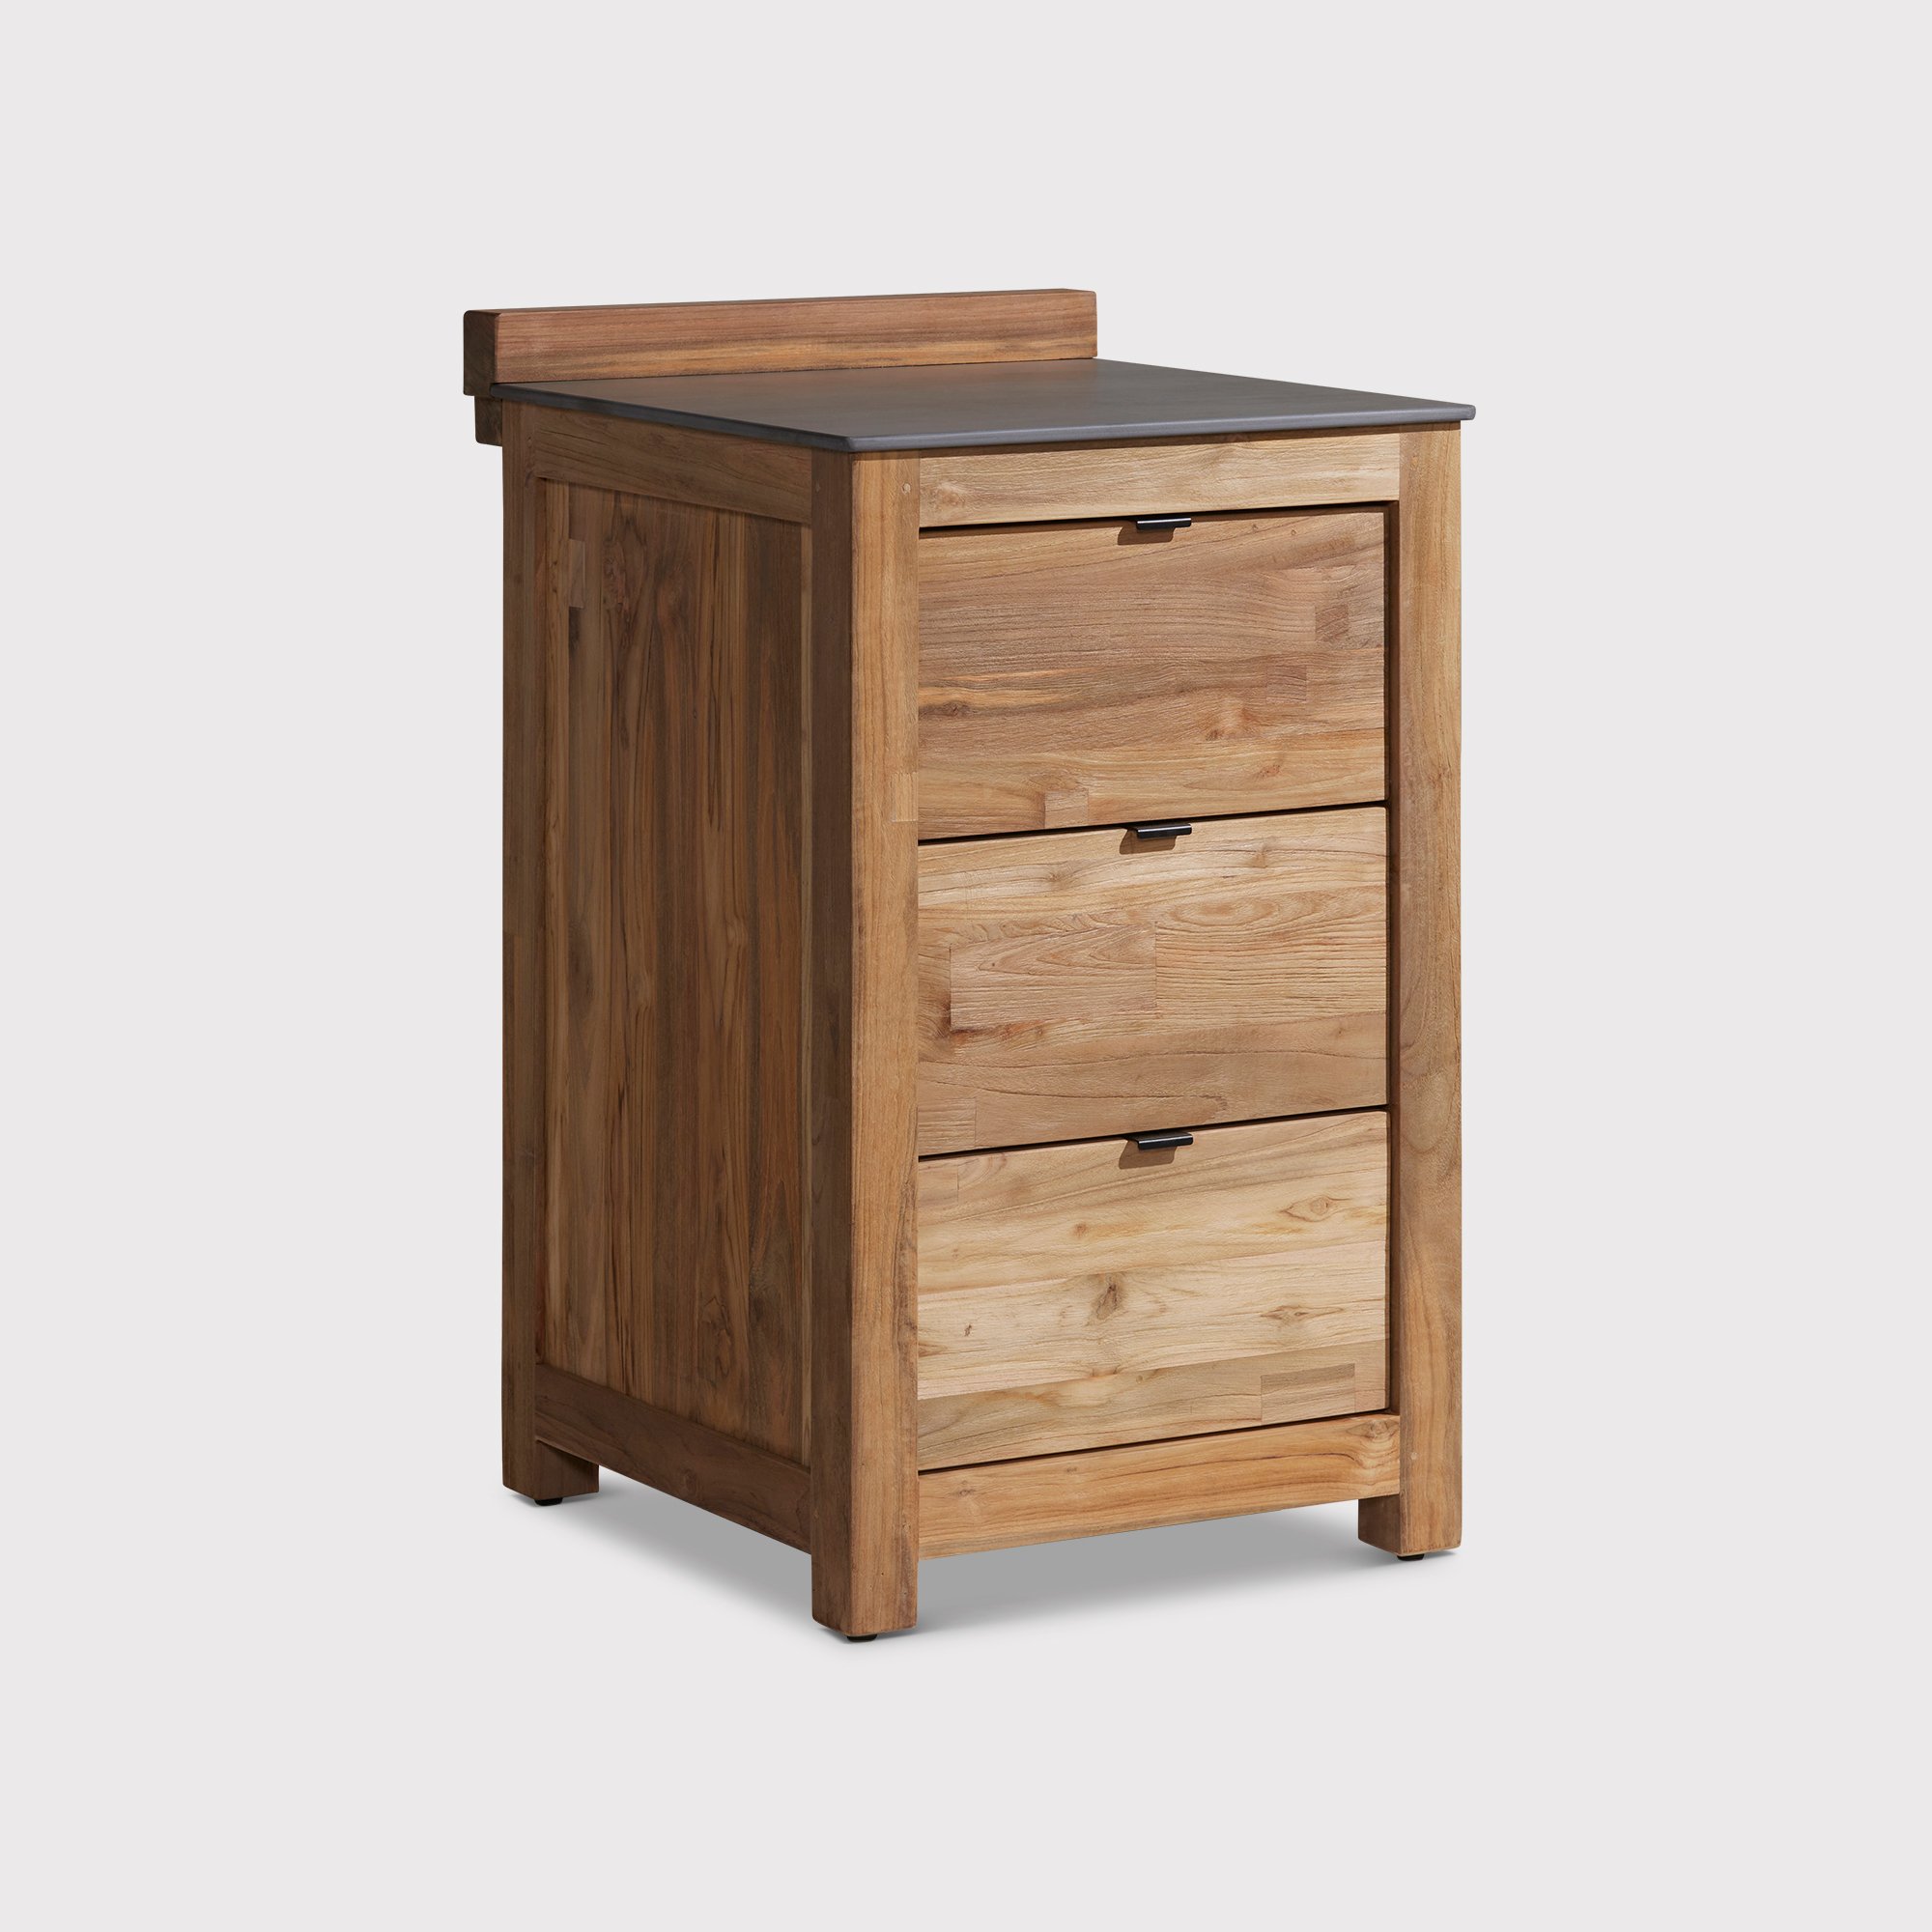 Grenada Grill Table With 3 Drawers, Neutral | Barker & Stonehouse